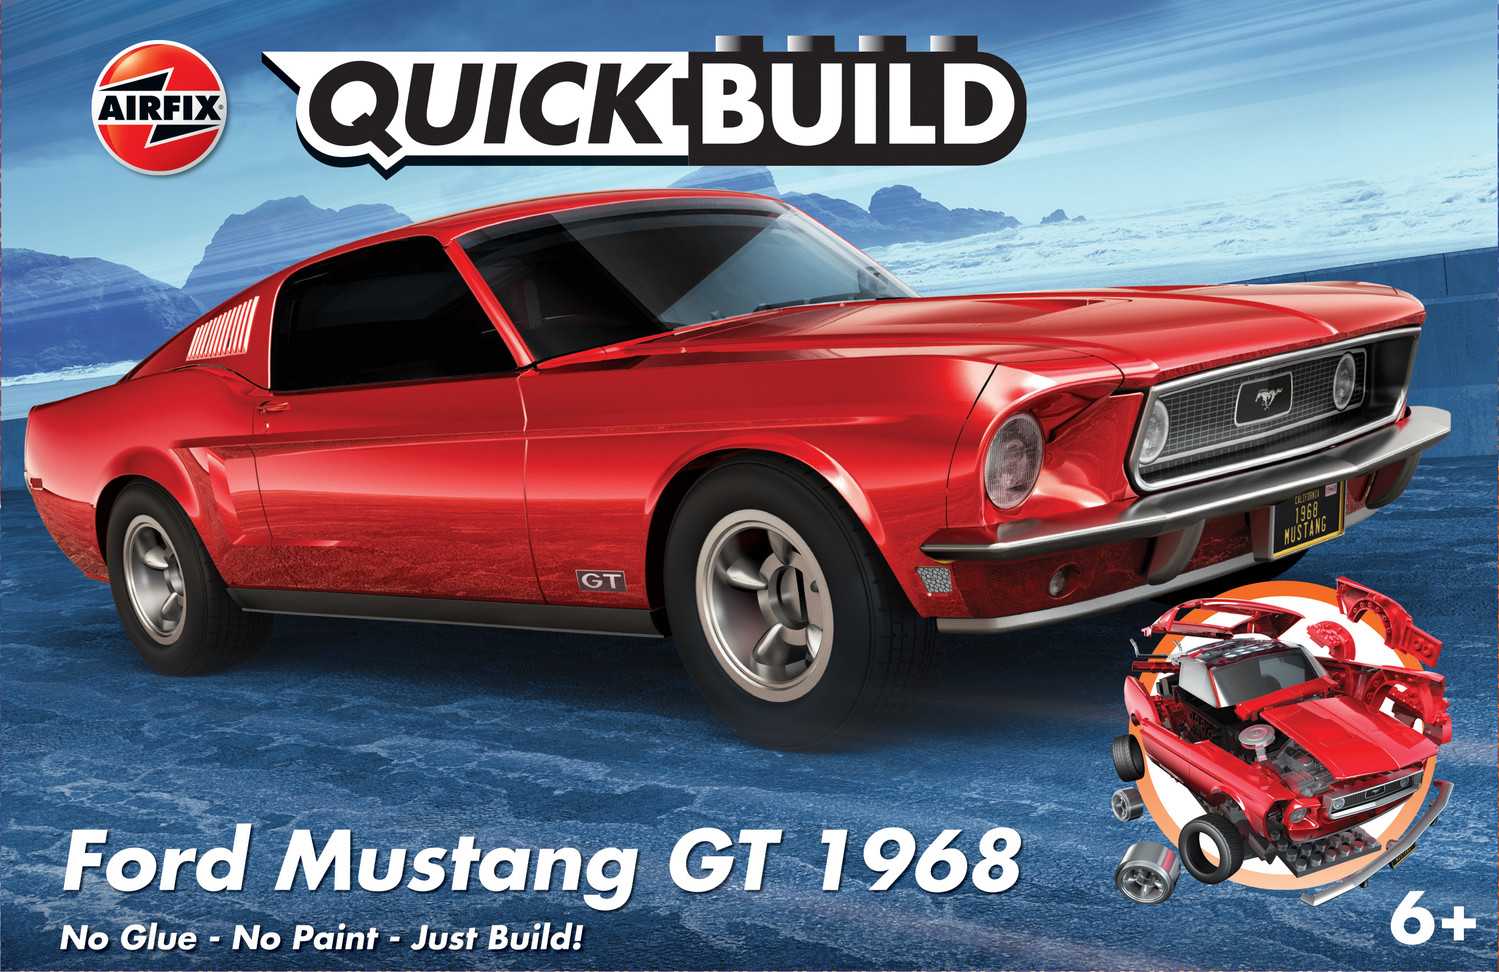 Quick Build J6035 - Ford Mustang GT 1968